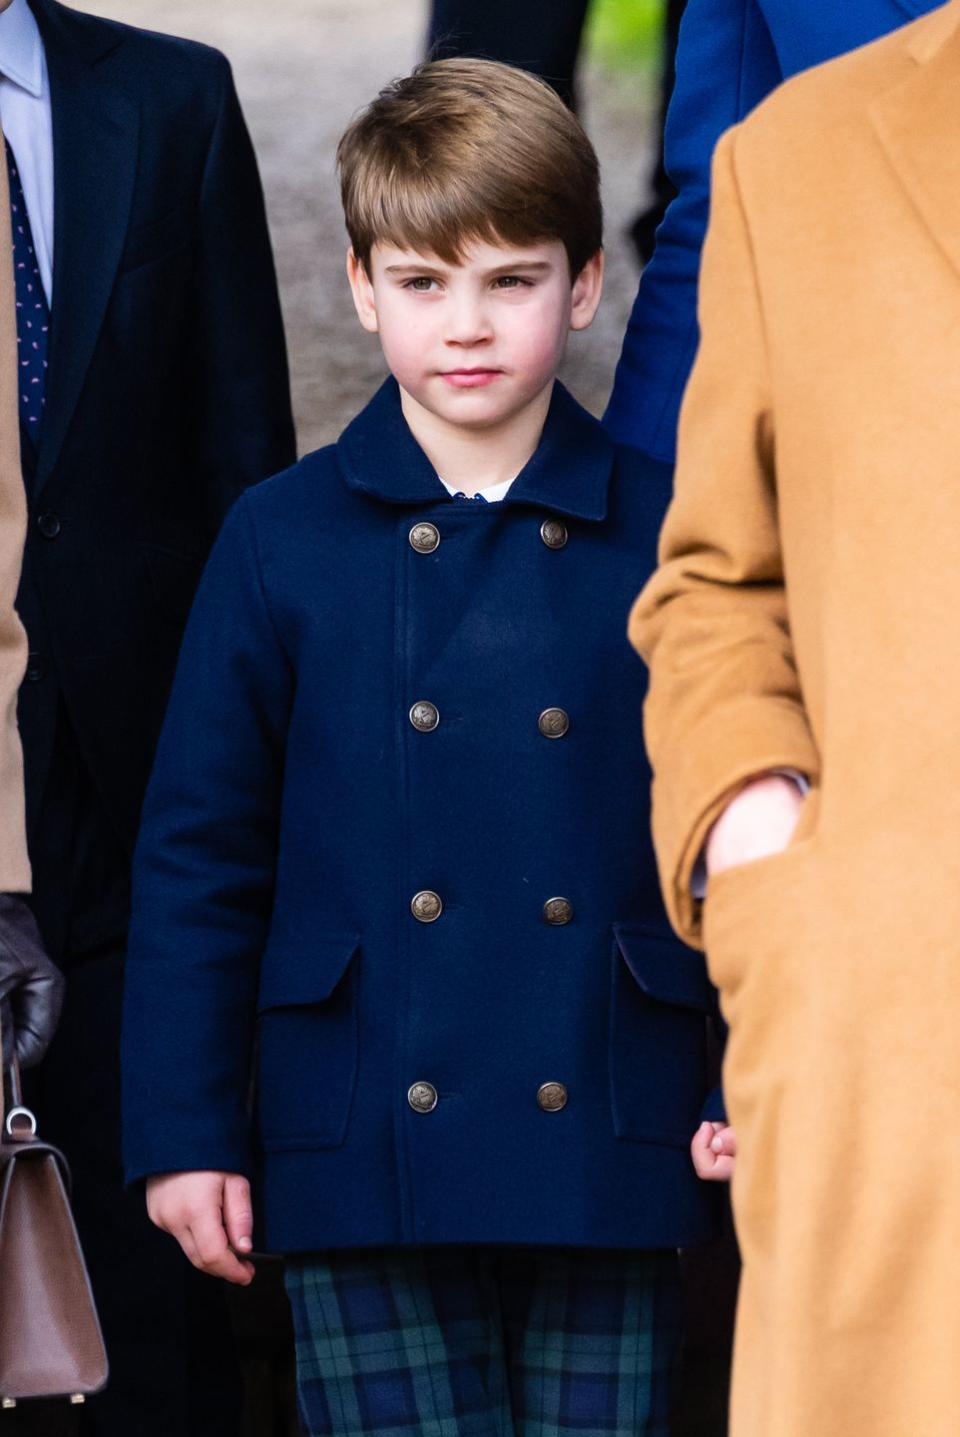 prince louis of wales stands in a blue peacoat and blue and green plaid pants among other people